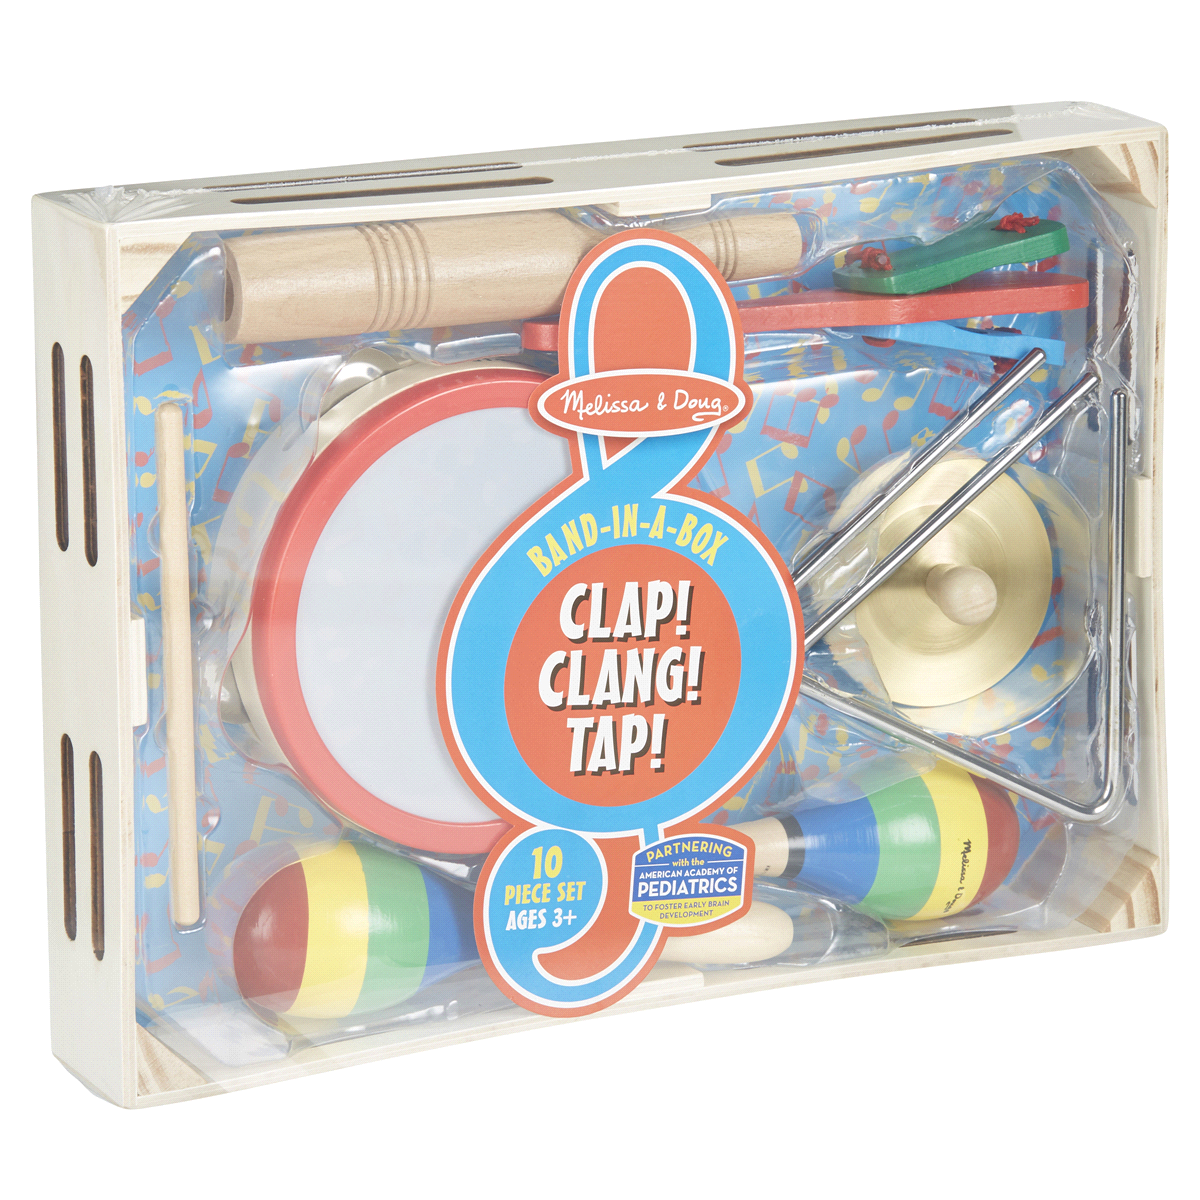 slide 5 of 29, Melissa & Doug Band-in-a-Box Clap! Clang! Tap! Musical Instrument Set, 10 ct